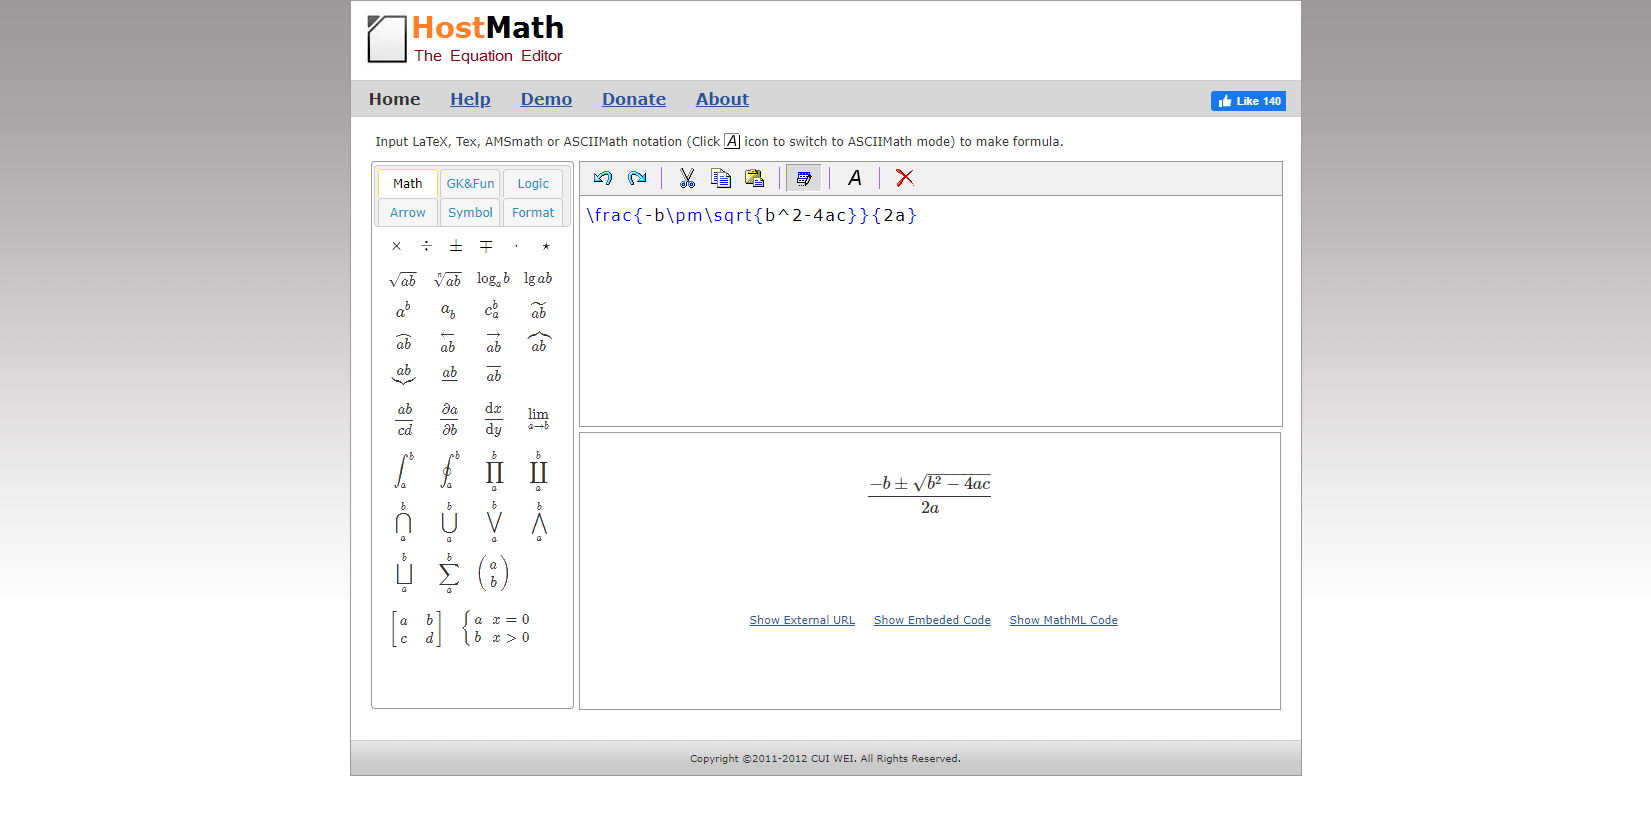 Use open source websites like hostmath to create the formulas or formatted text using latex code.